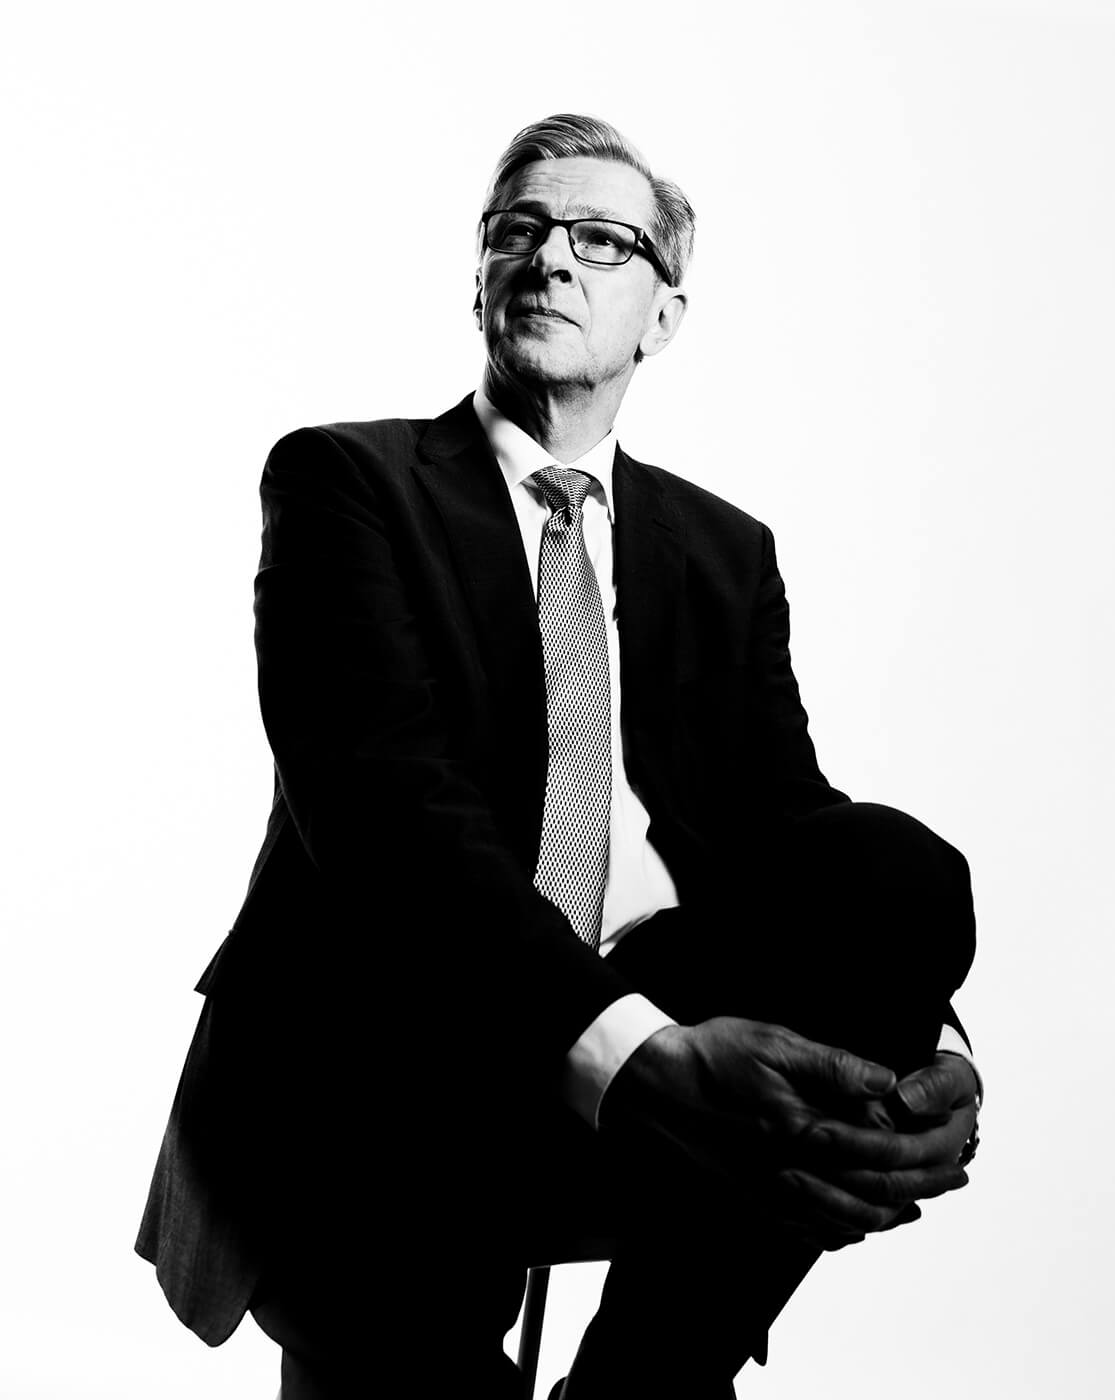 A black and white corporate portrait of a man wearing a suit sitting on a chair